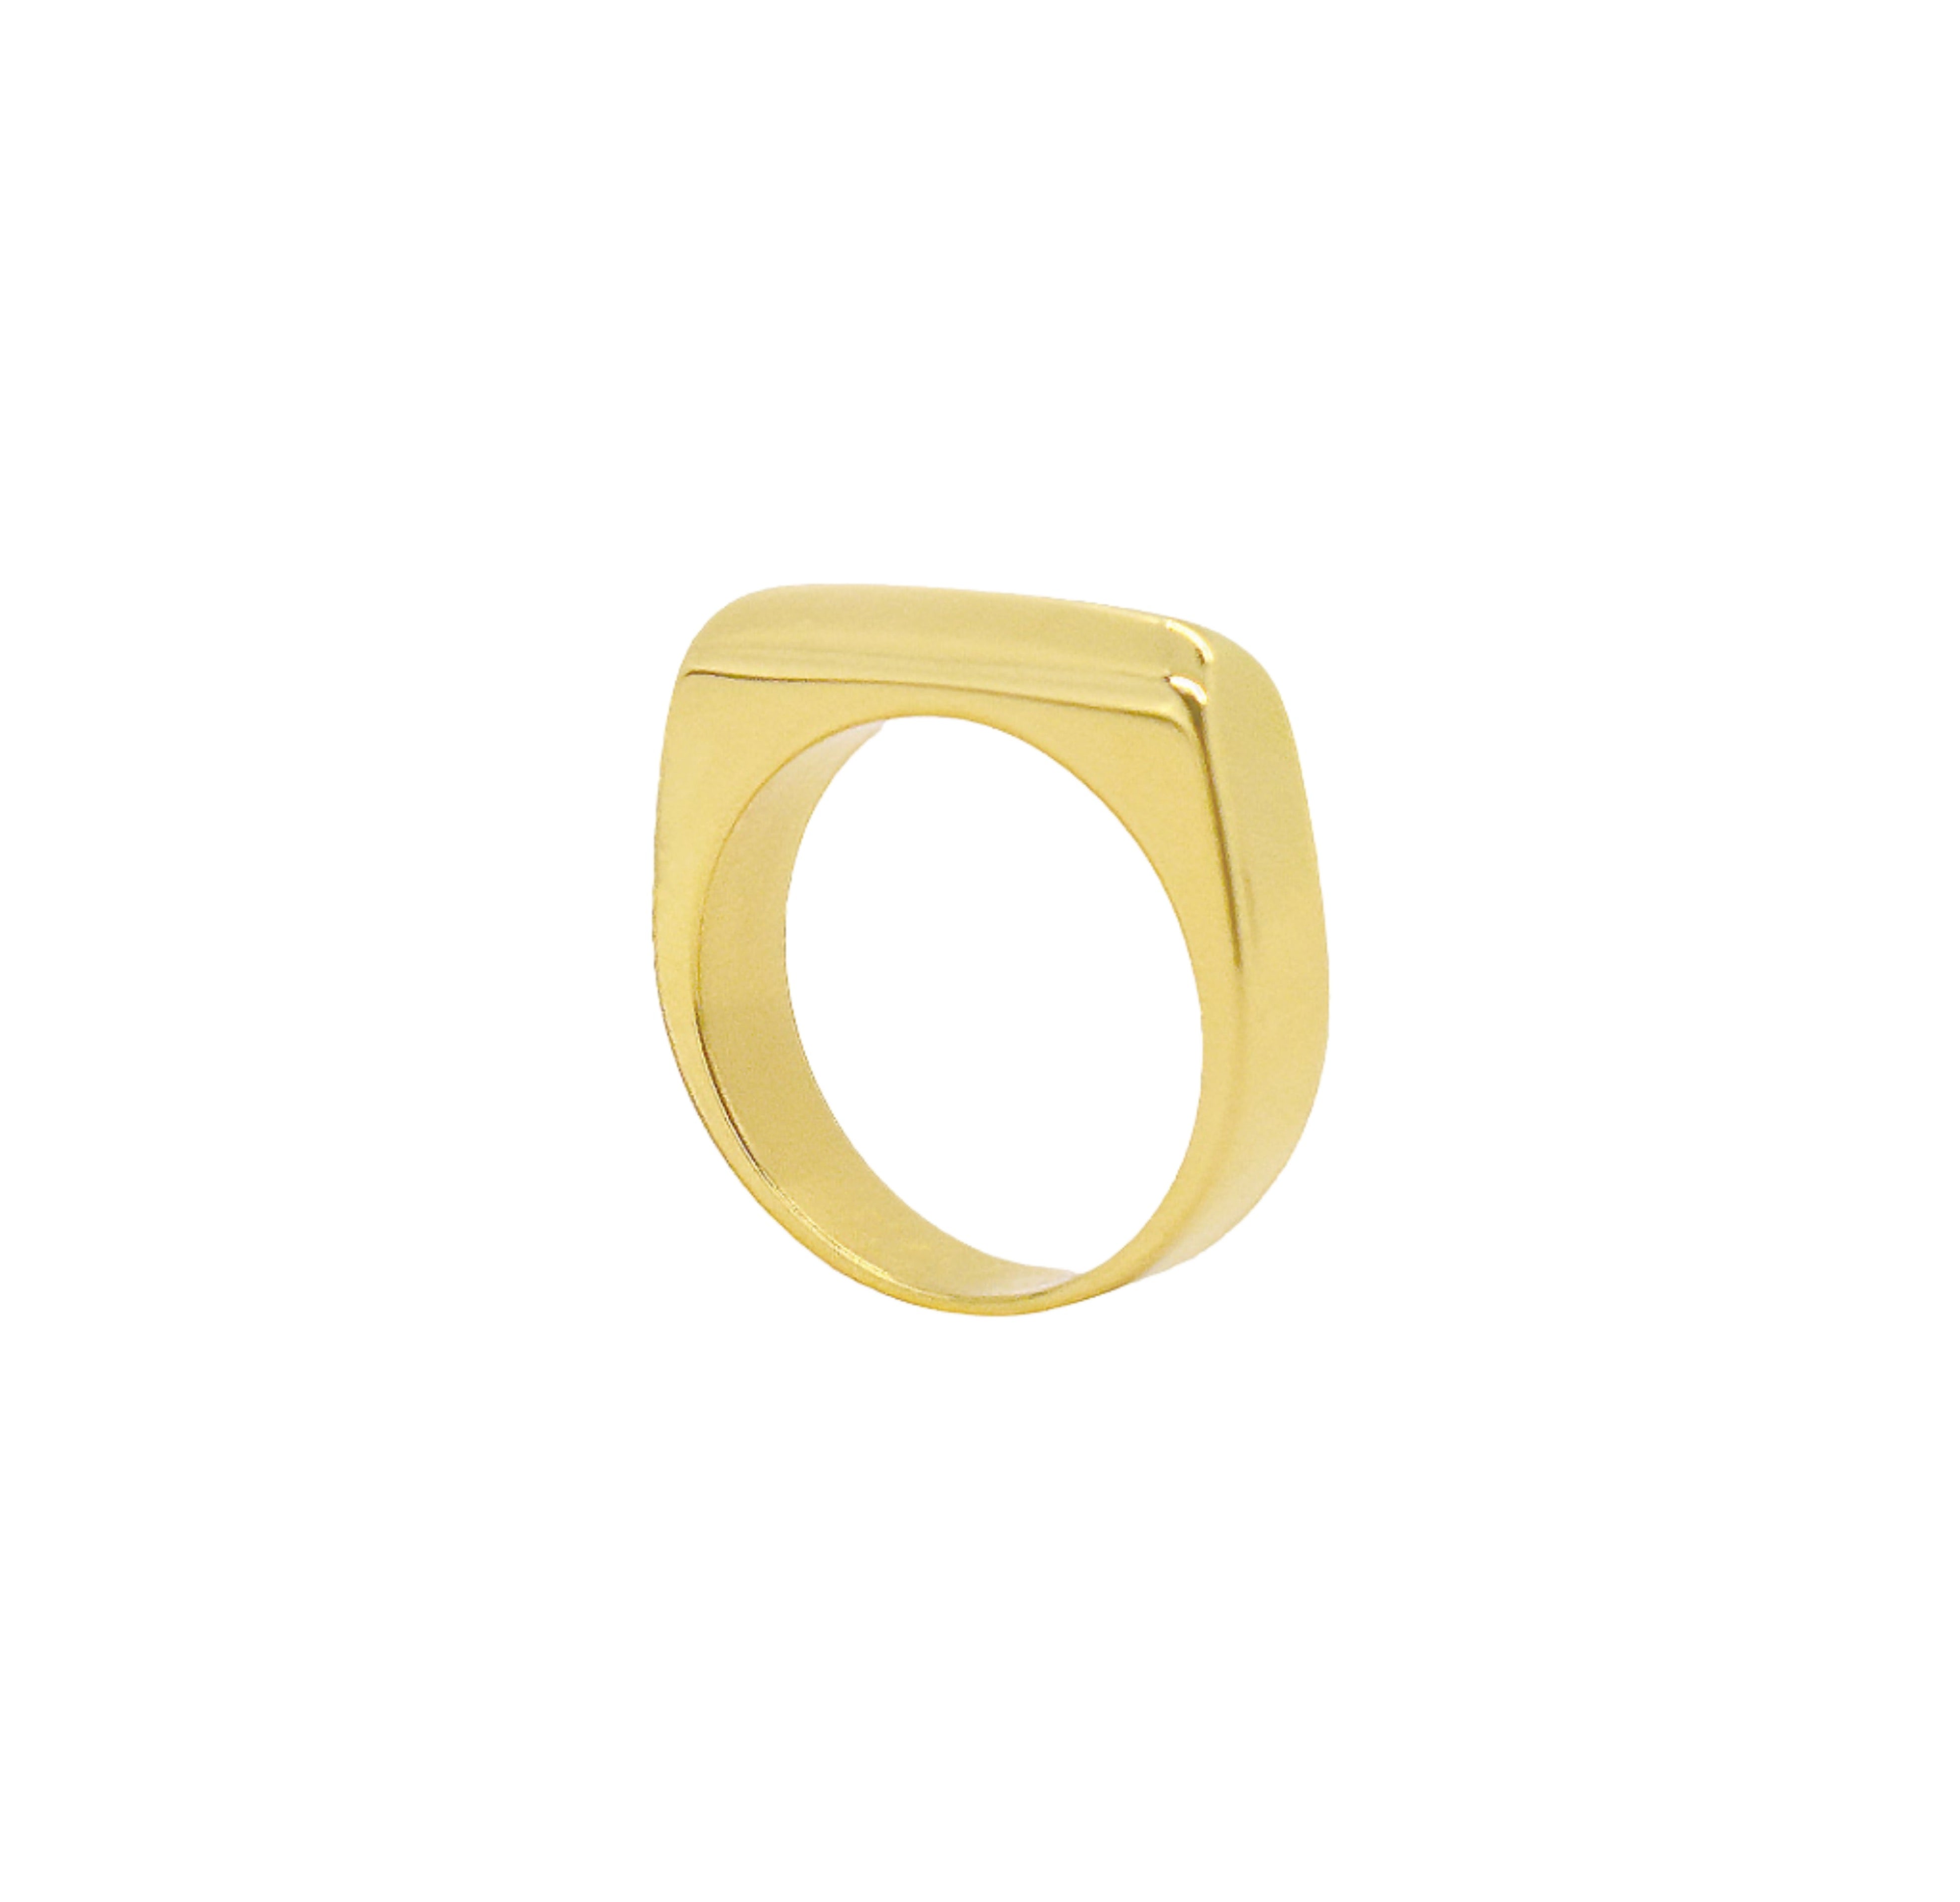 gold bar dome ring waterproof jewelry 